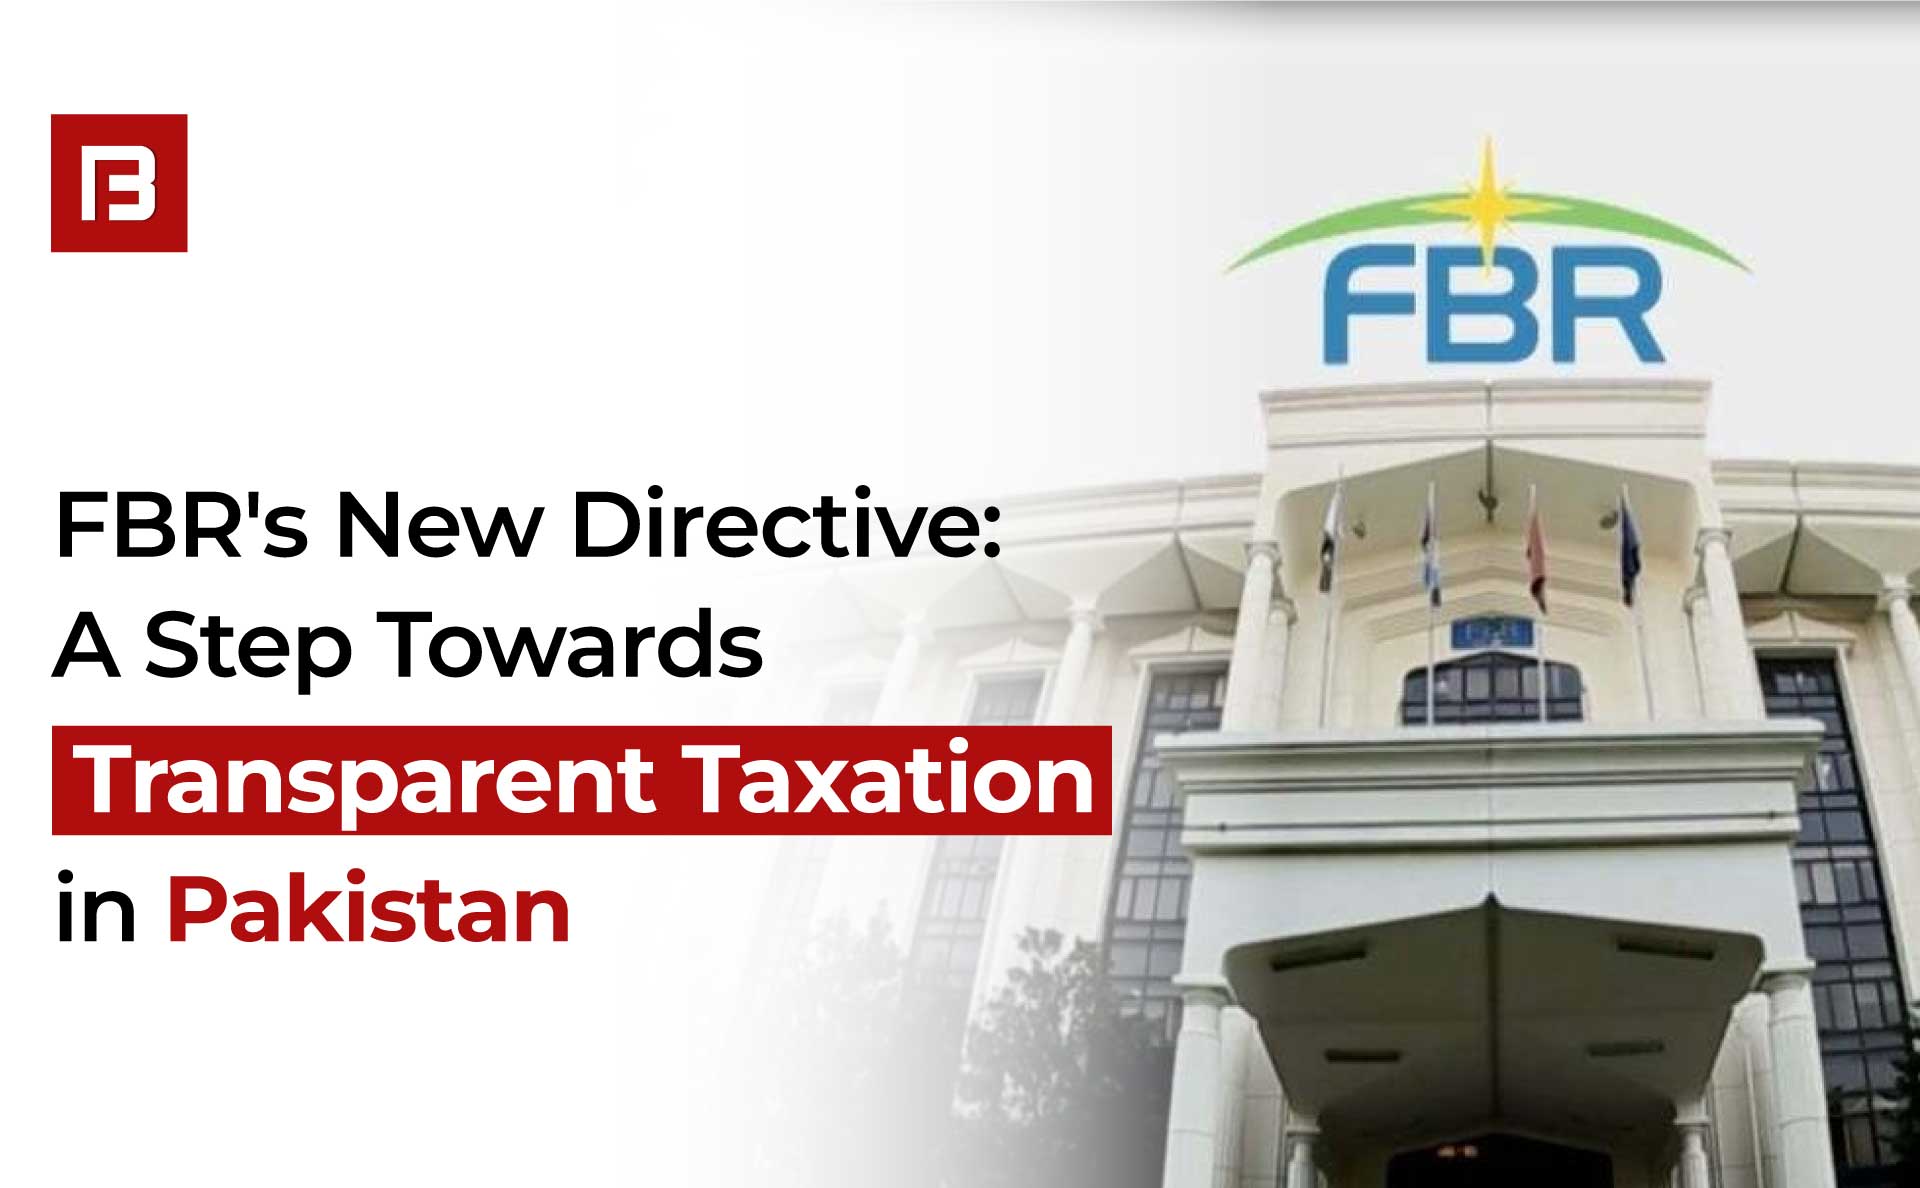 FBR’s New Directive: A Step Towards Transparent Taxation in Pakistan